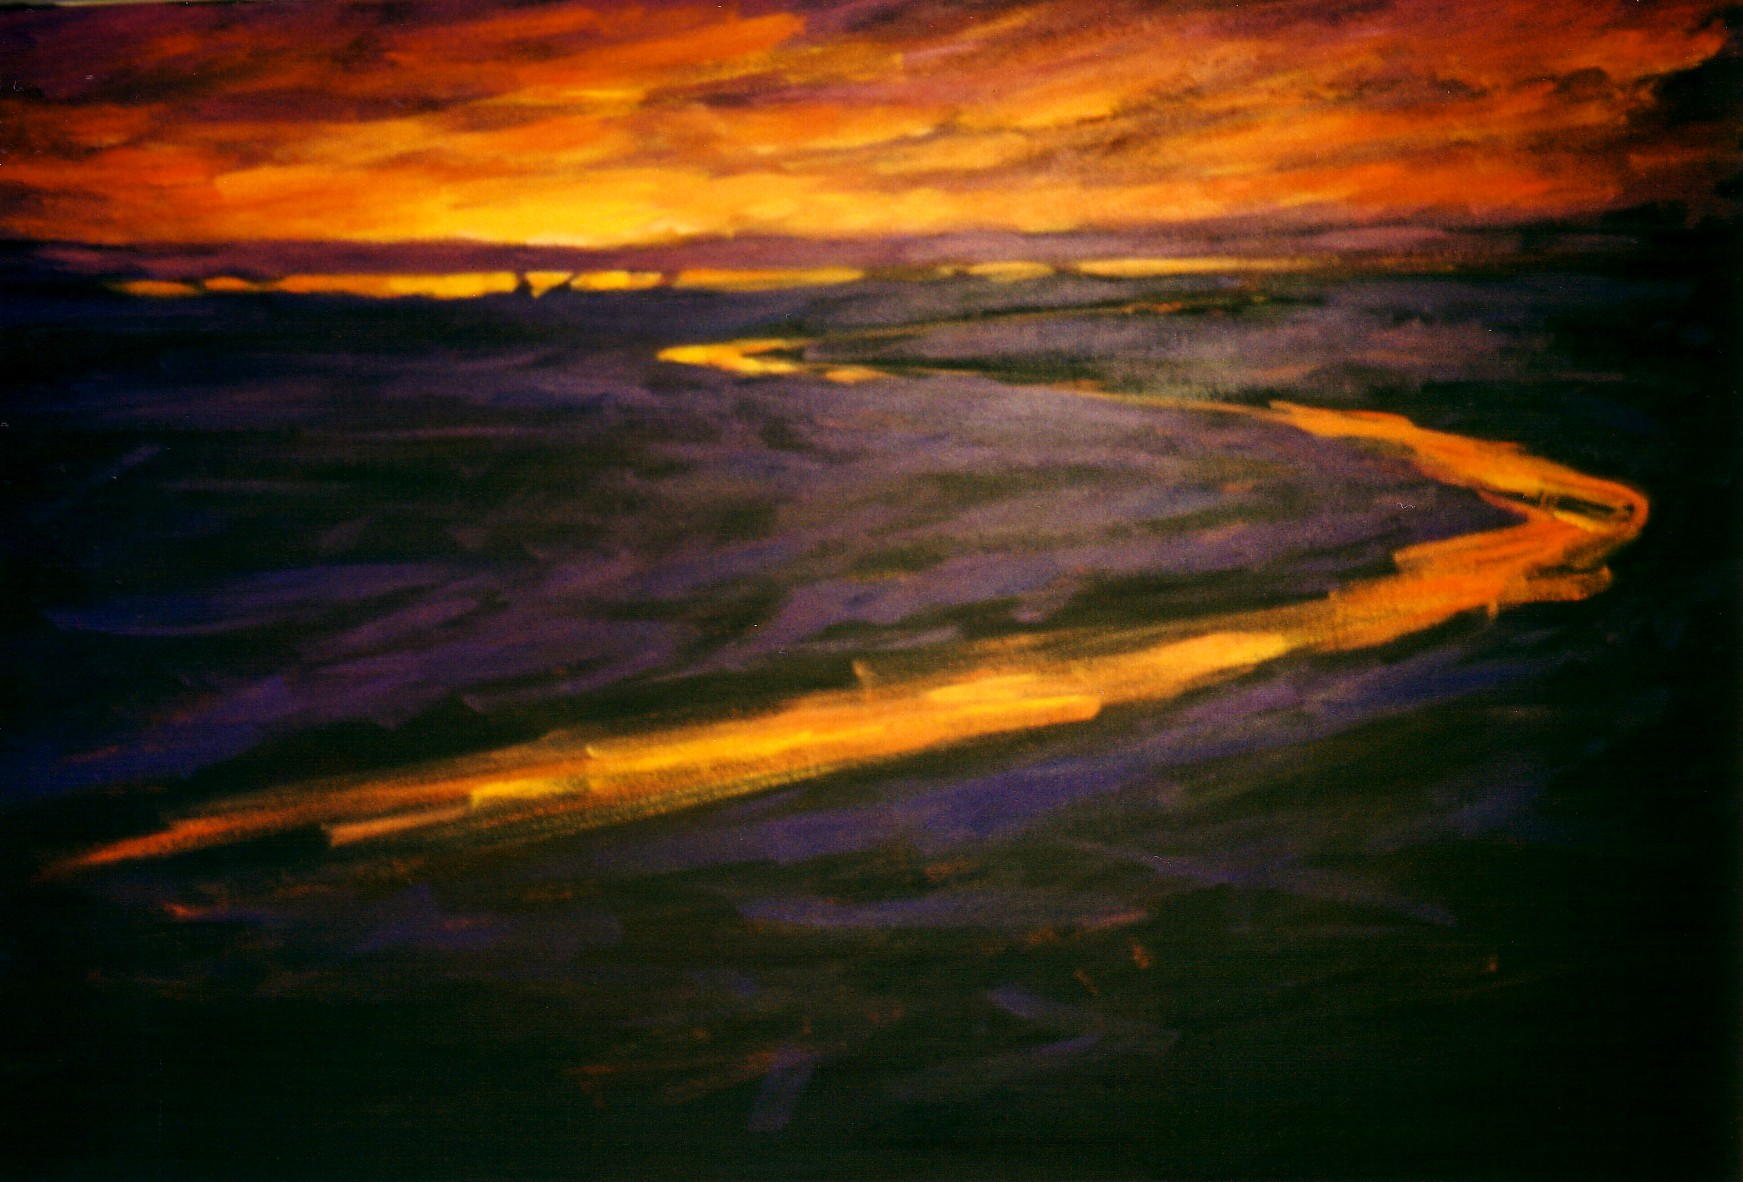 acrylic painting of a river at dawn